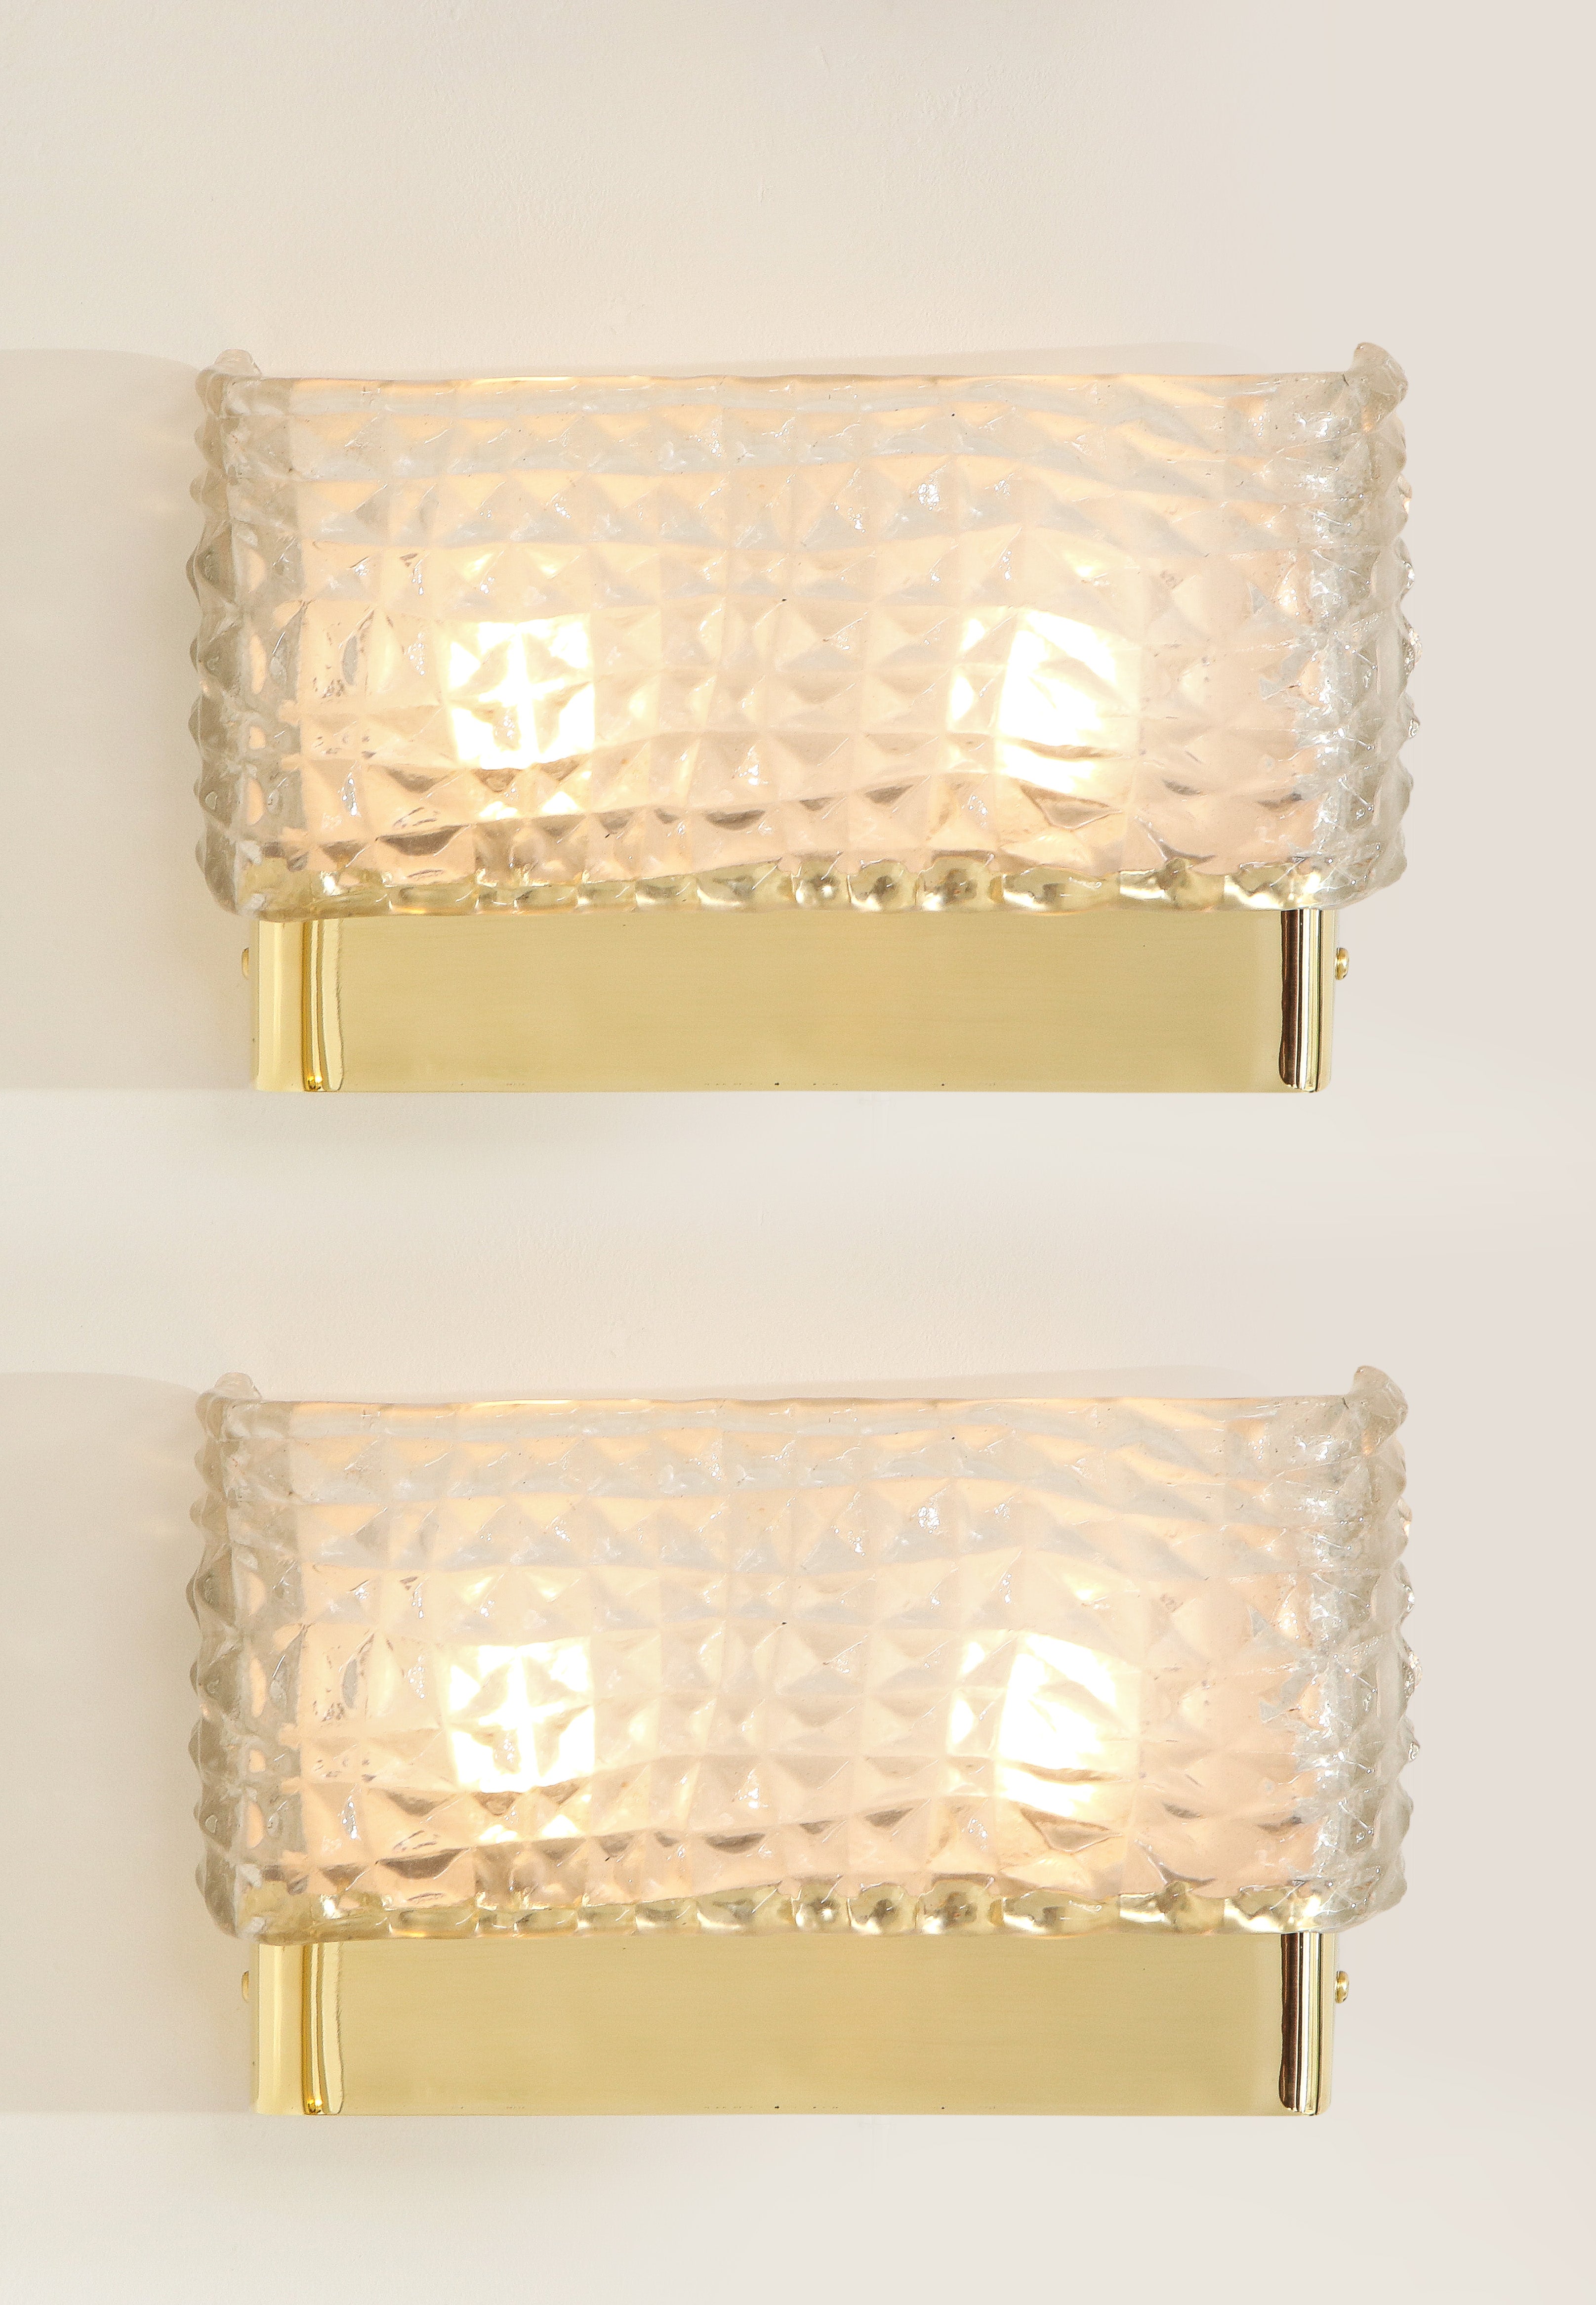 Pair of clear Murano textured glass and brass rectangular sconces handmade in Italy, 2022. Hand-casted translucent and textured clear white Murano Glass rectangular shade is mounted on a simple brass base. Solid brass caps hold the glass shade in